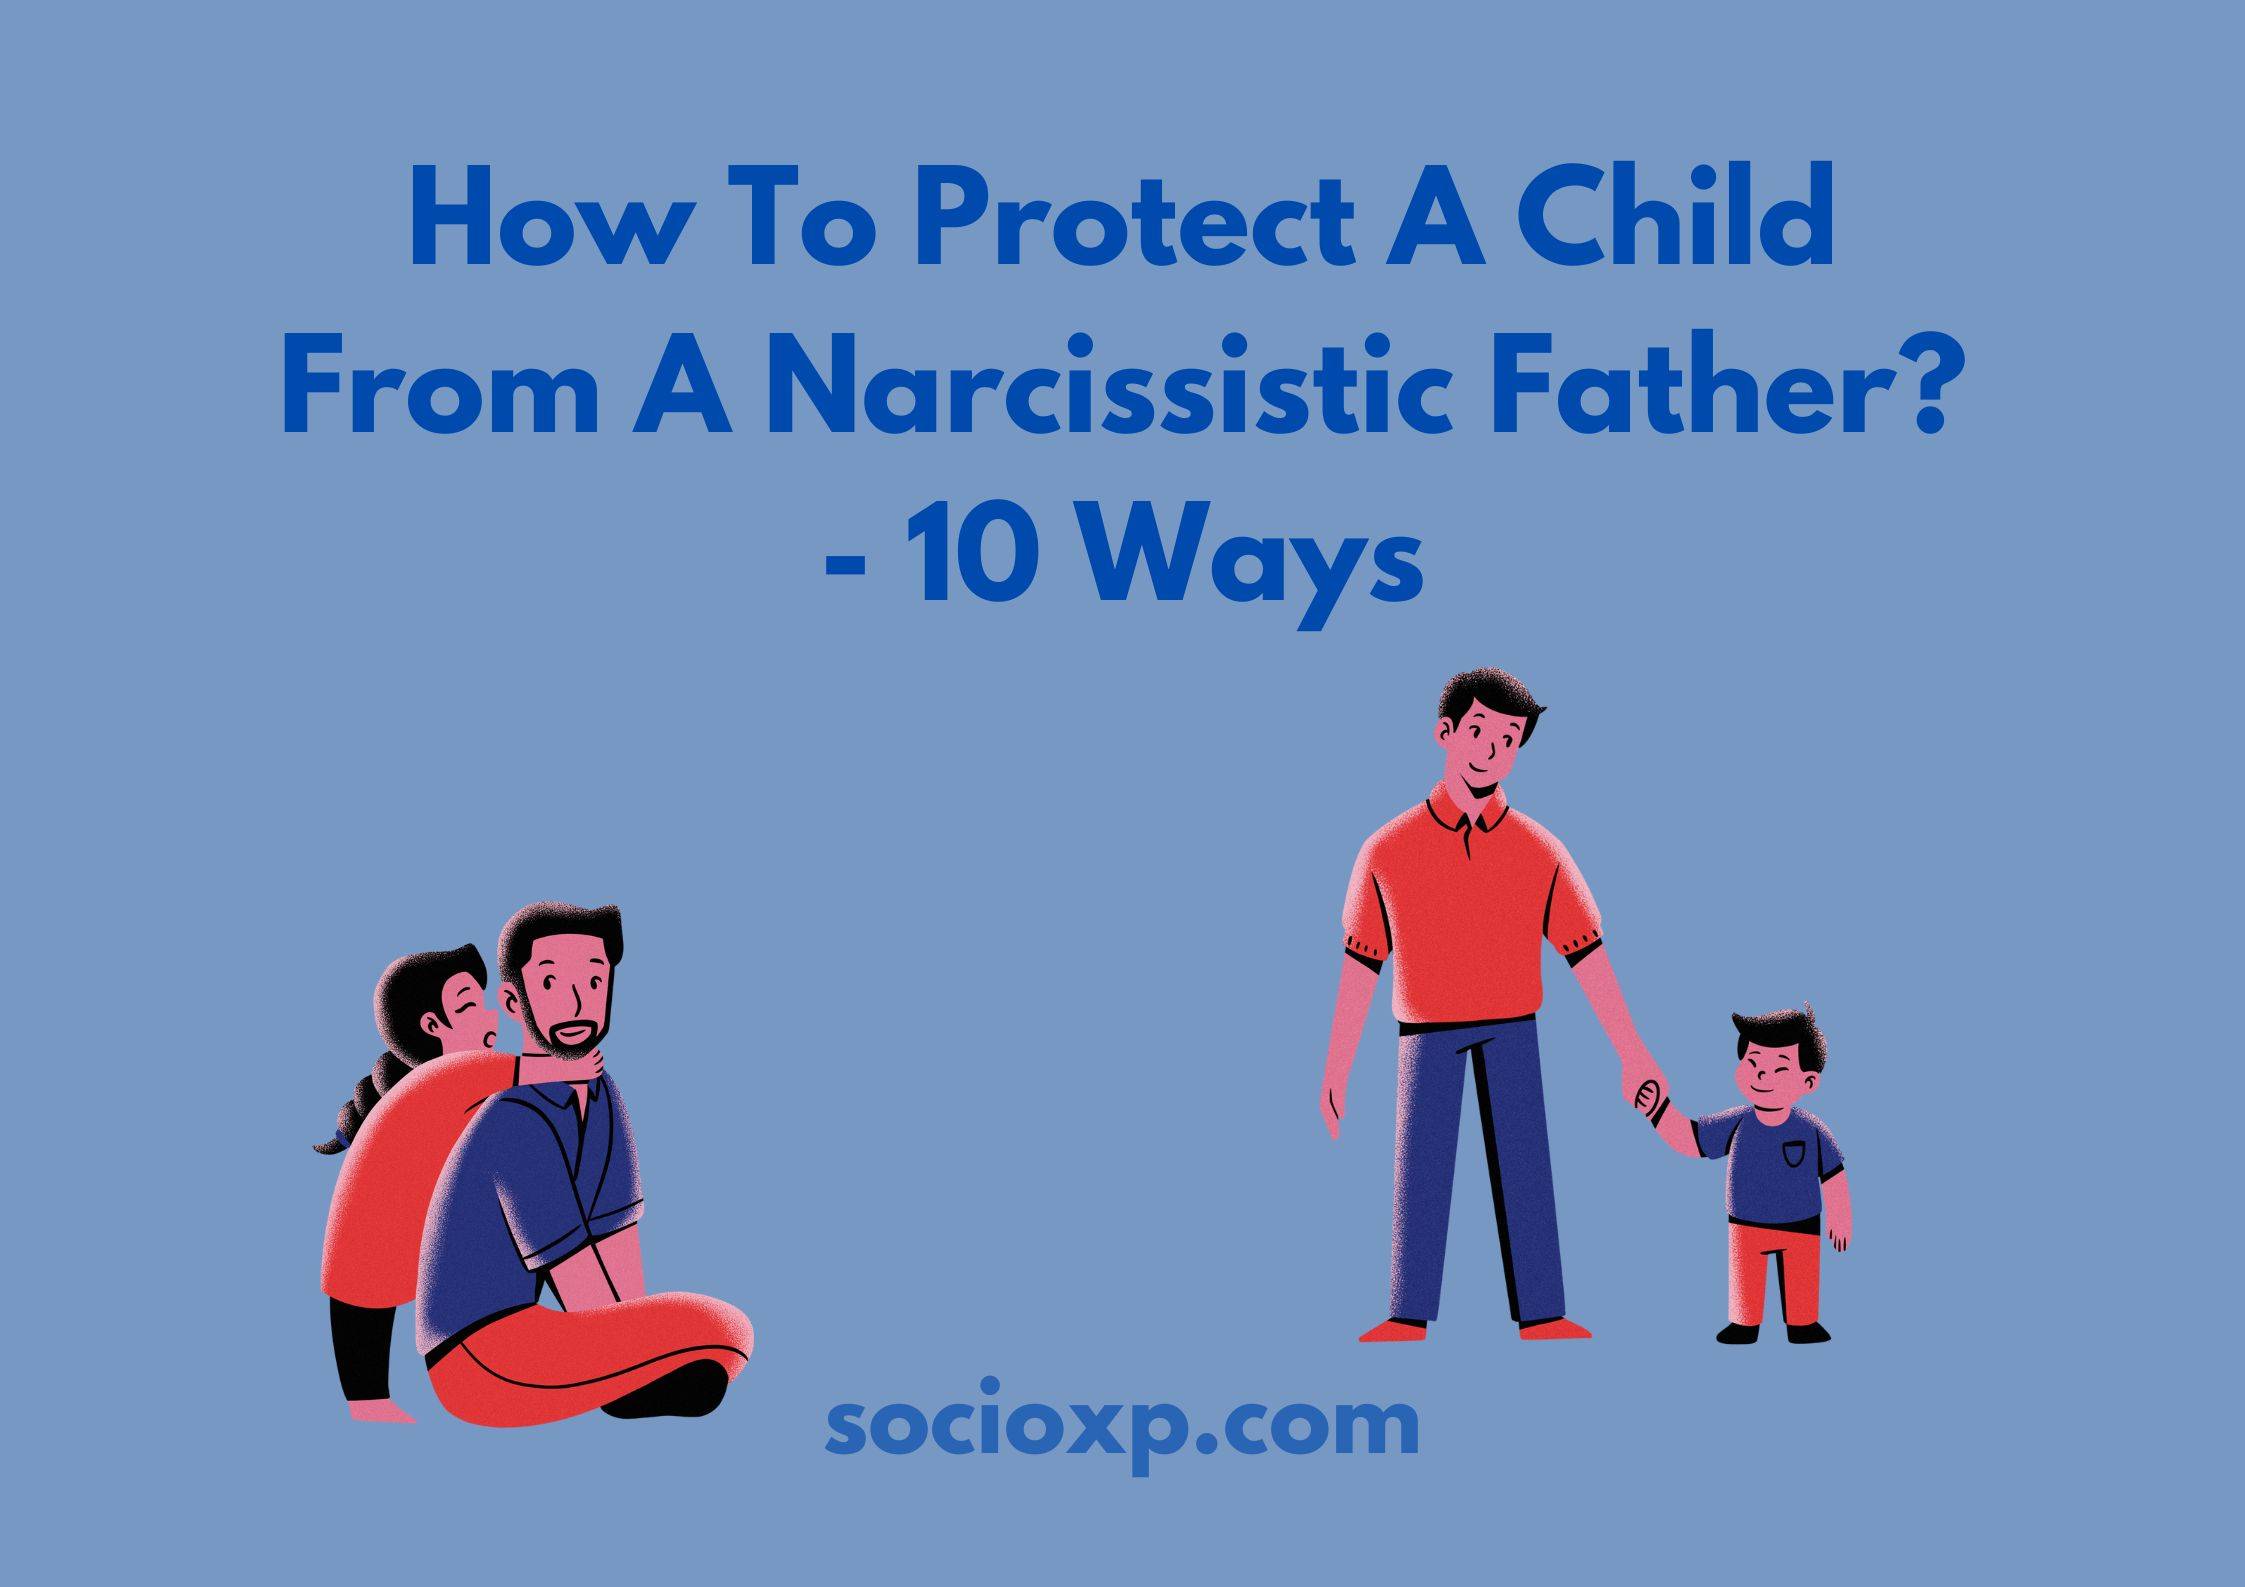 How To Protect A Child From A Narcissistic Father? - 10 Ways